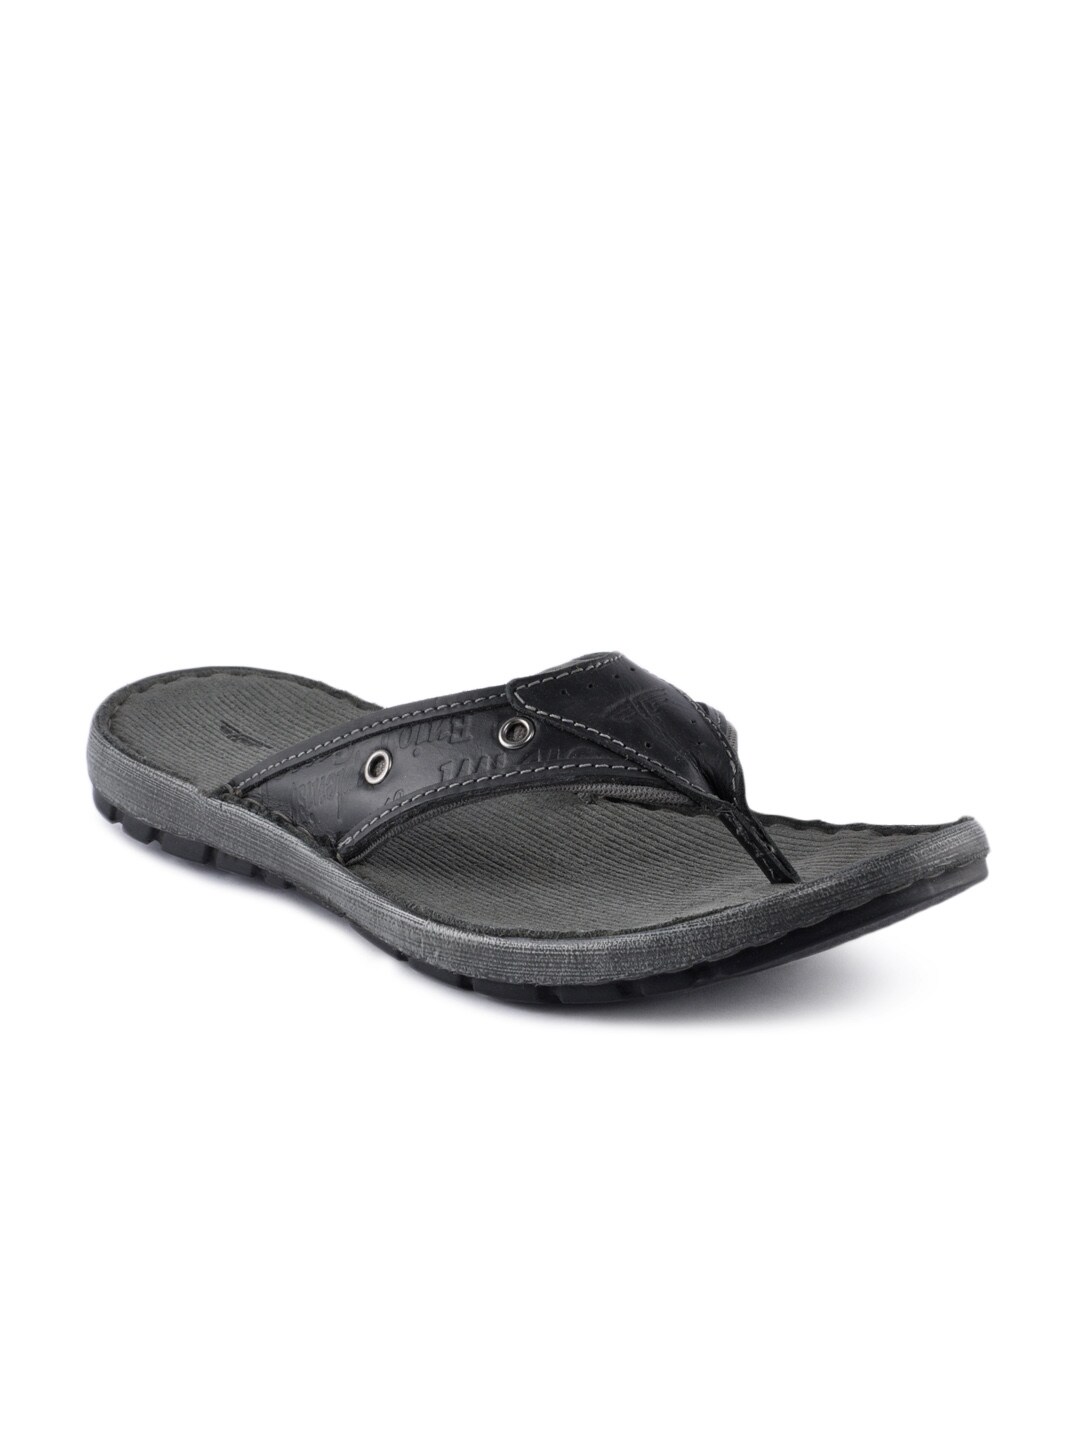 Red Tape Men Grey Casual Sandals